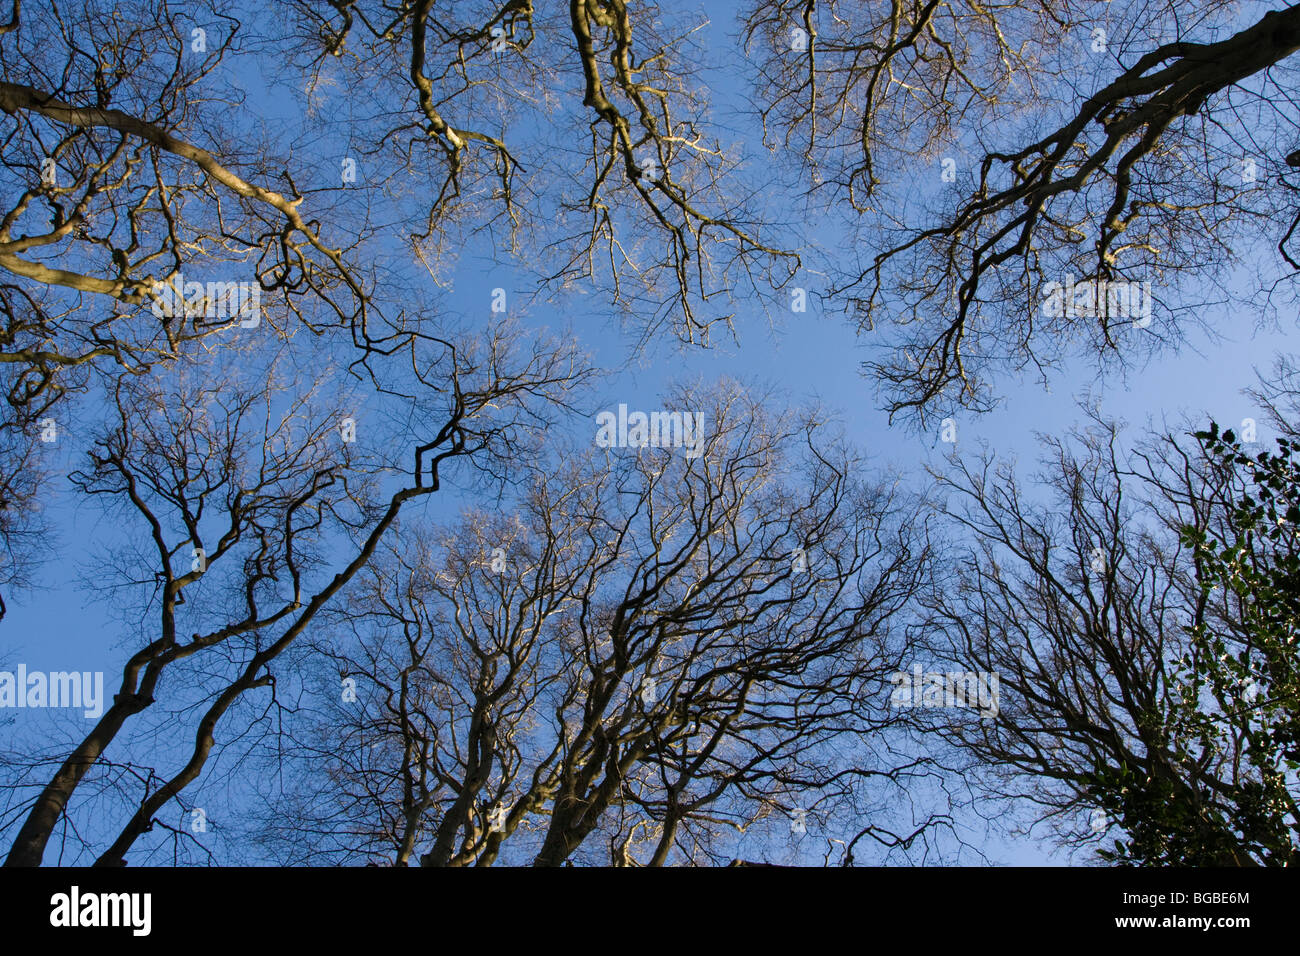 Silver Birch Trees viewed to upper branches canopy, New Forest, UK Stock Photo